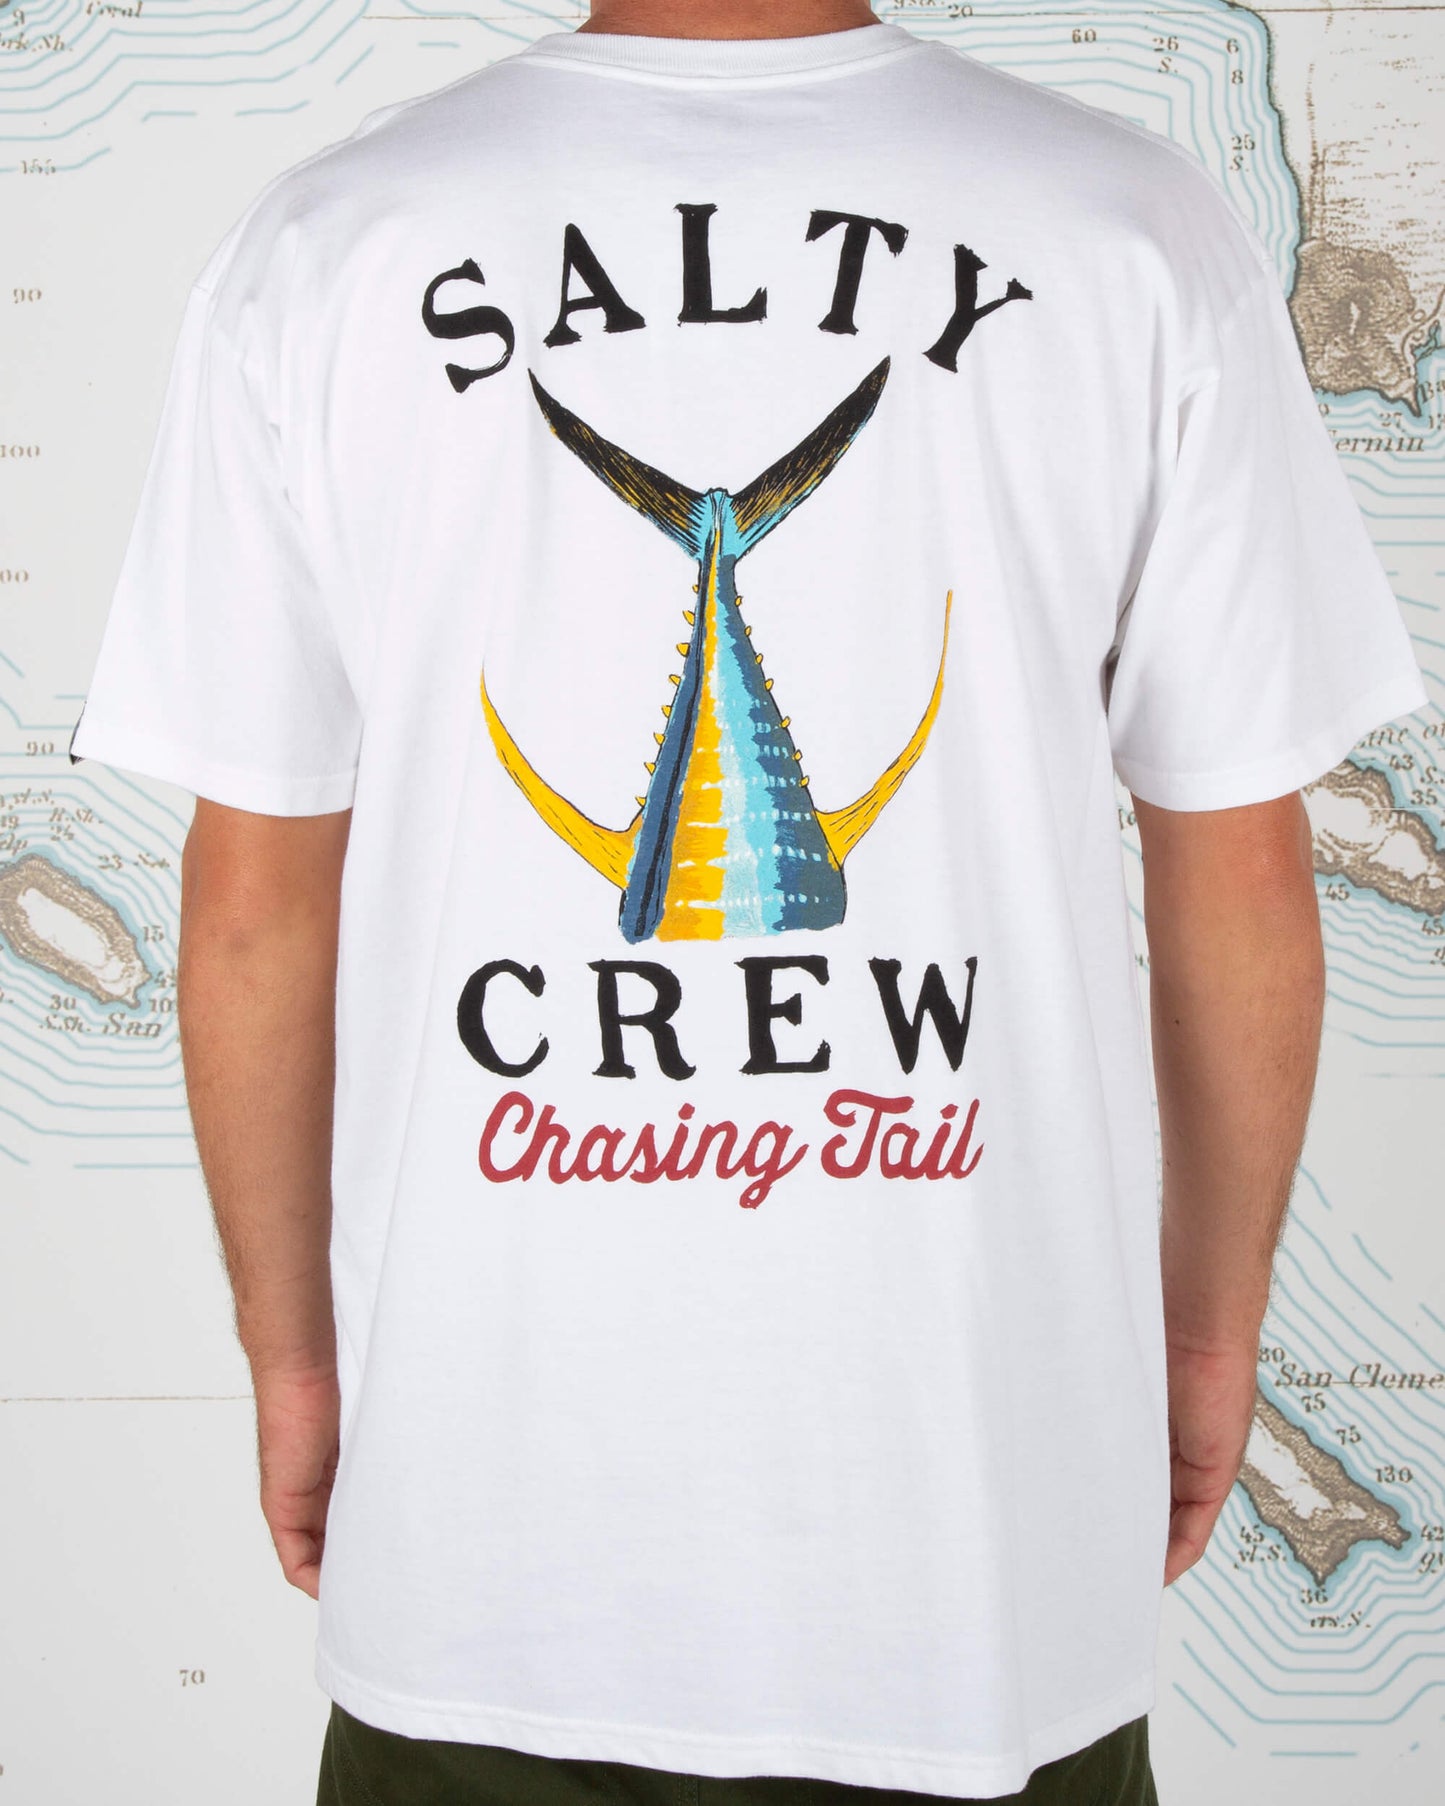 Salty crew Men's Tees Tailed White Standard S/S Tee in White